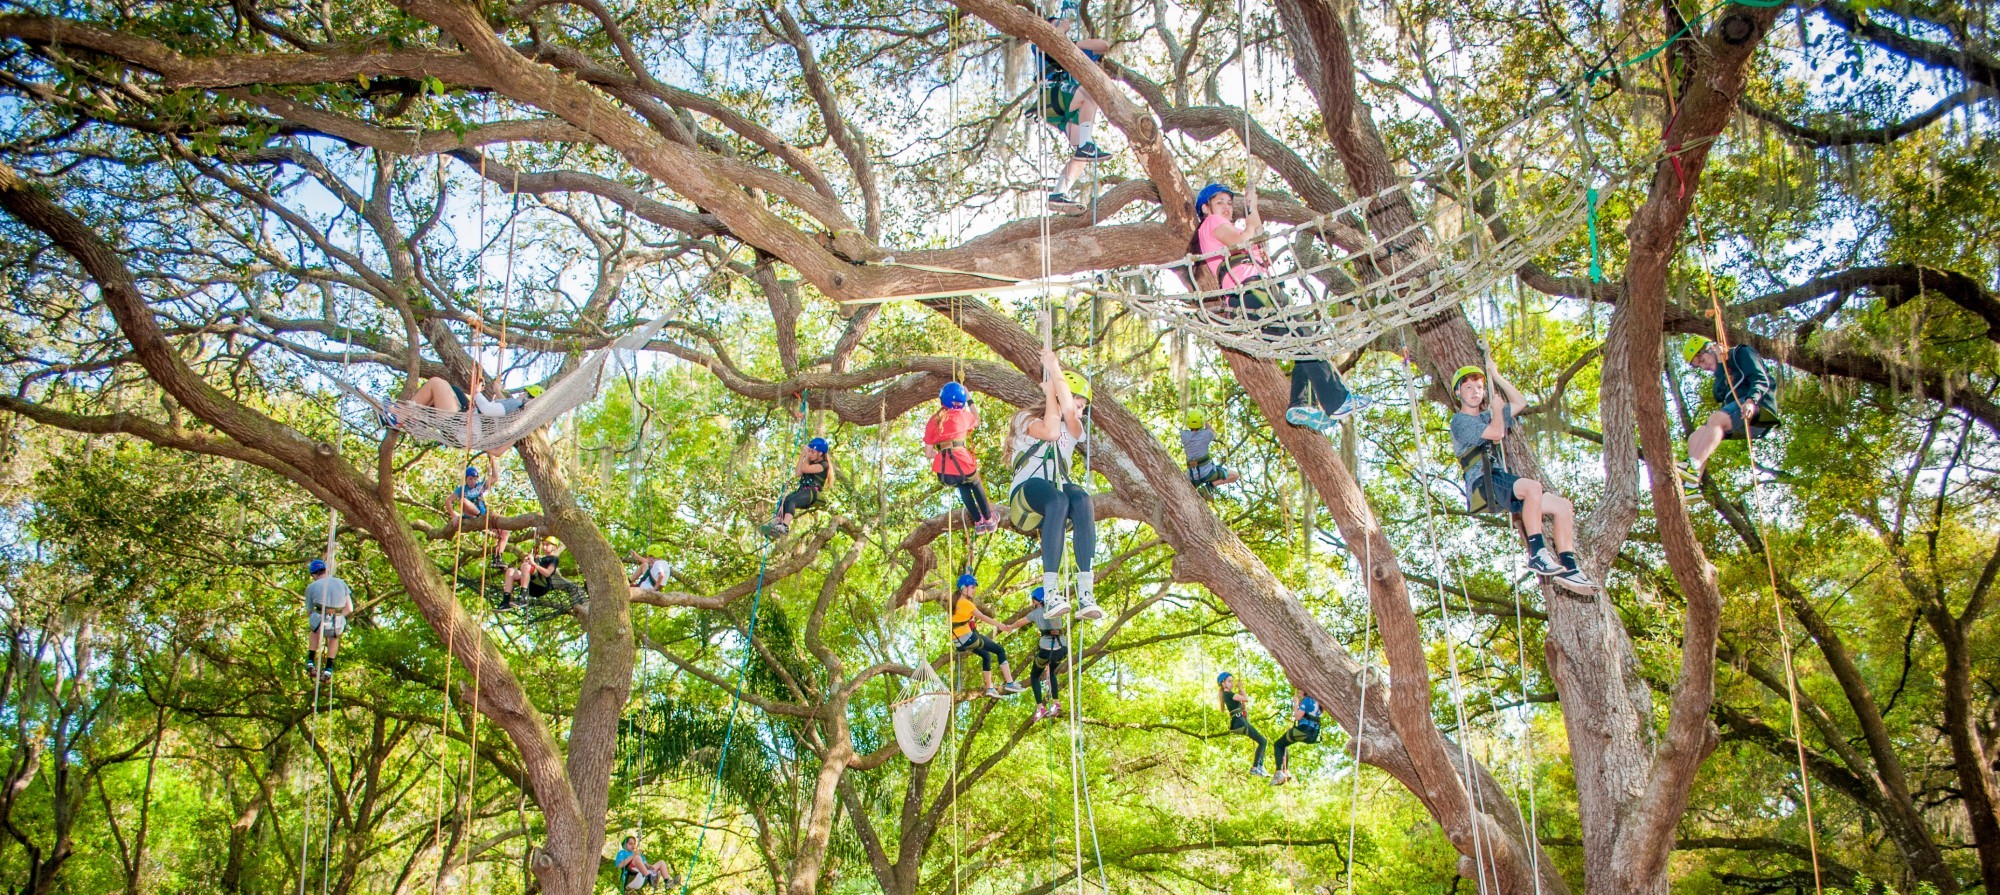 A group on an outdoor adventure during a technical tree climbing program